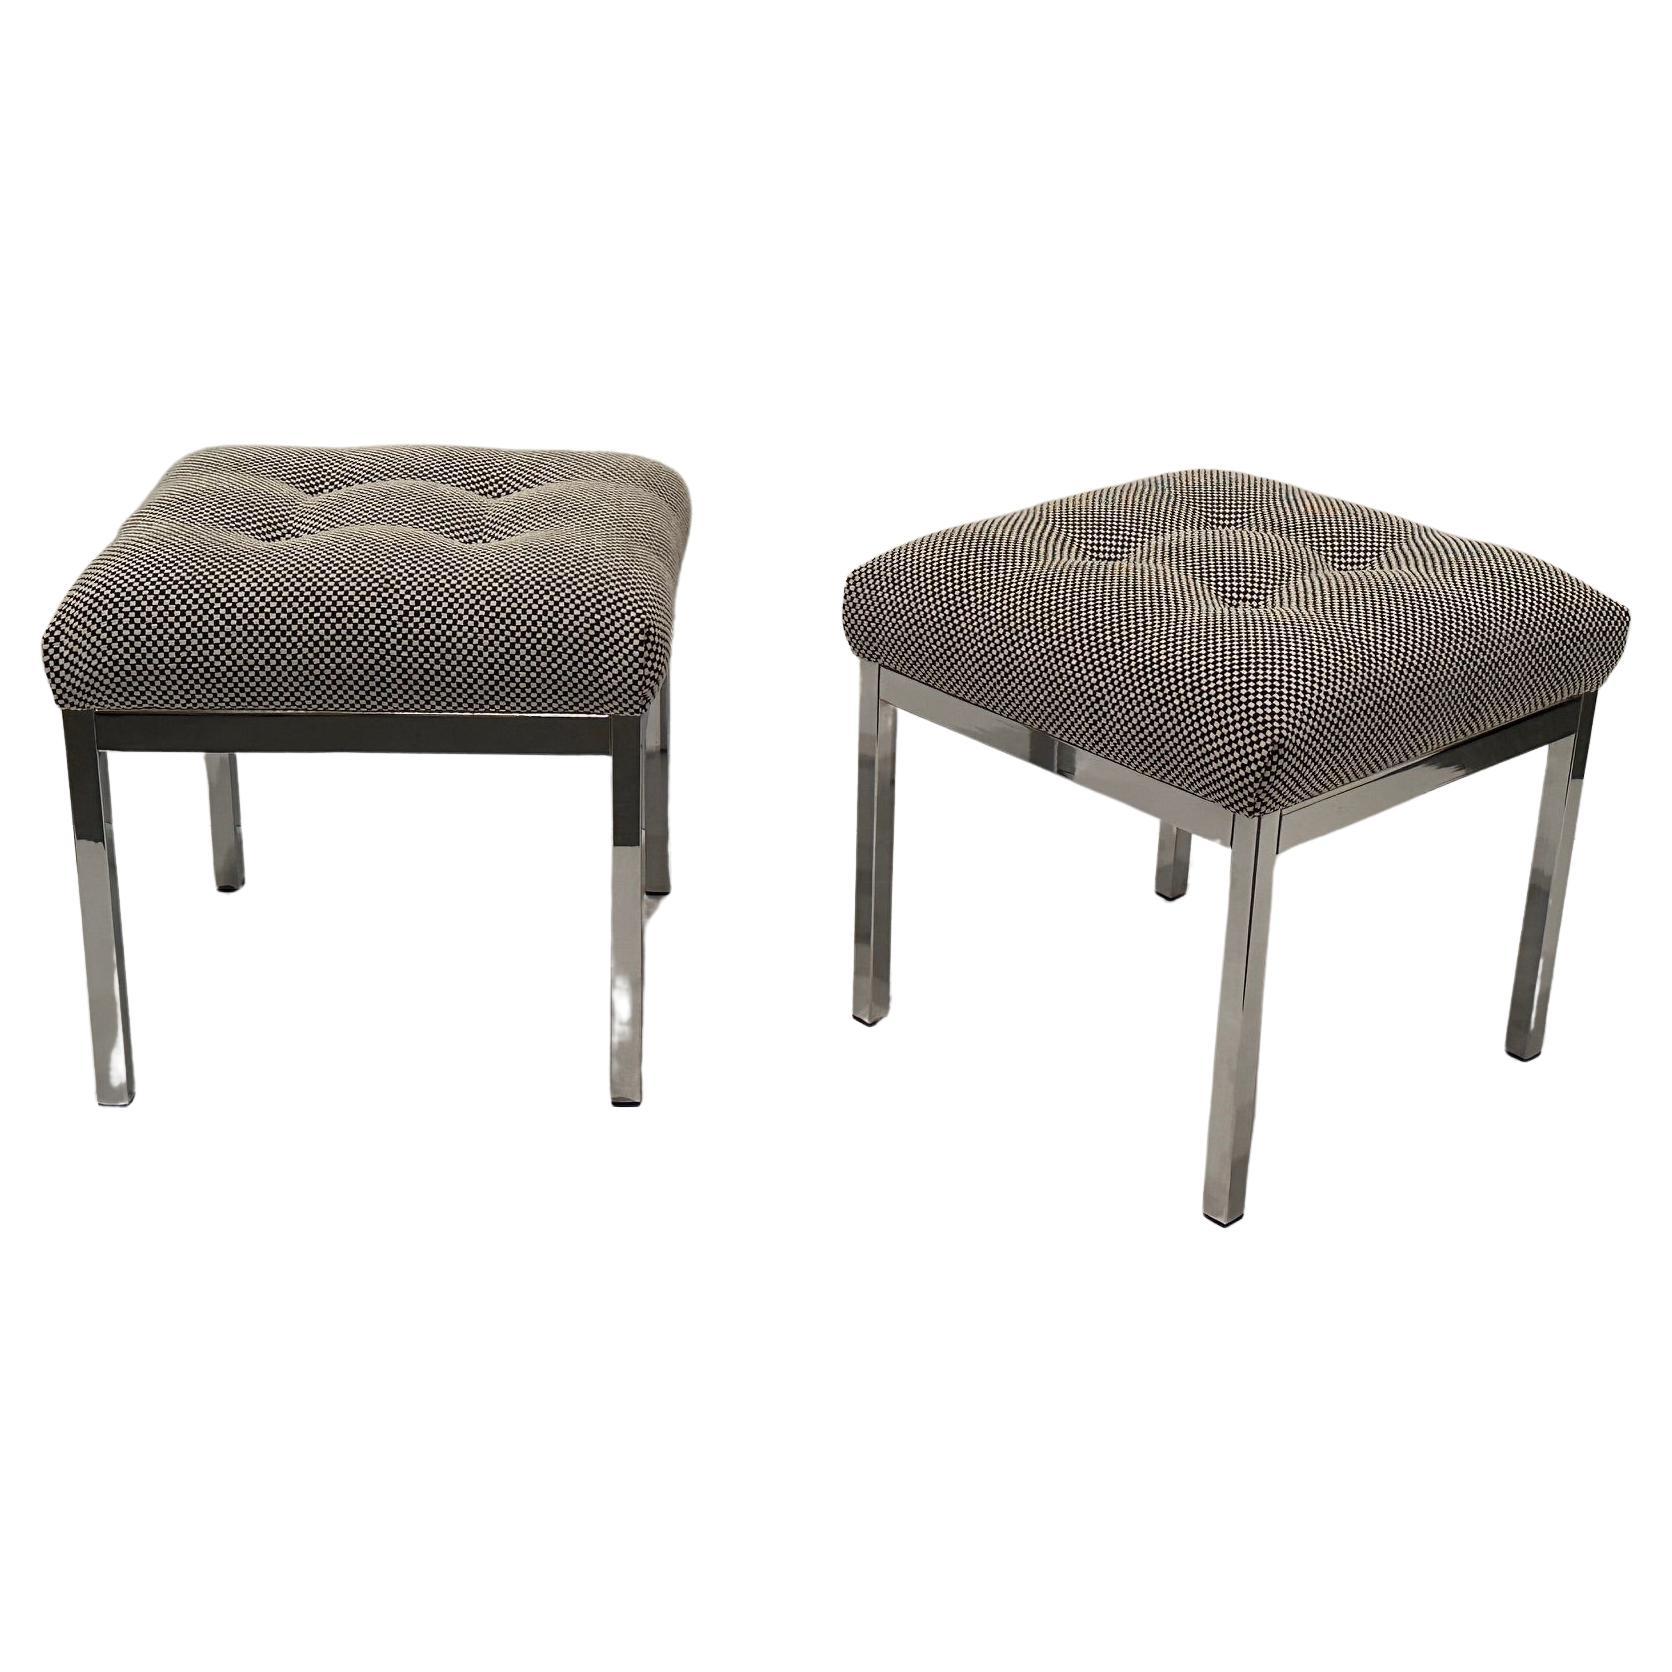 Sleek Pair of Mid Century Modern Chrome Ottomans with New Upholstery For Sale